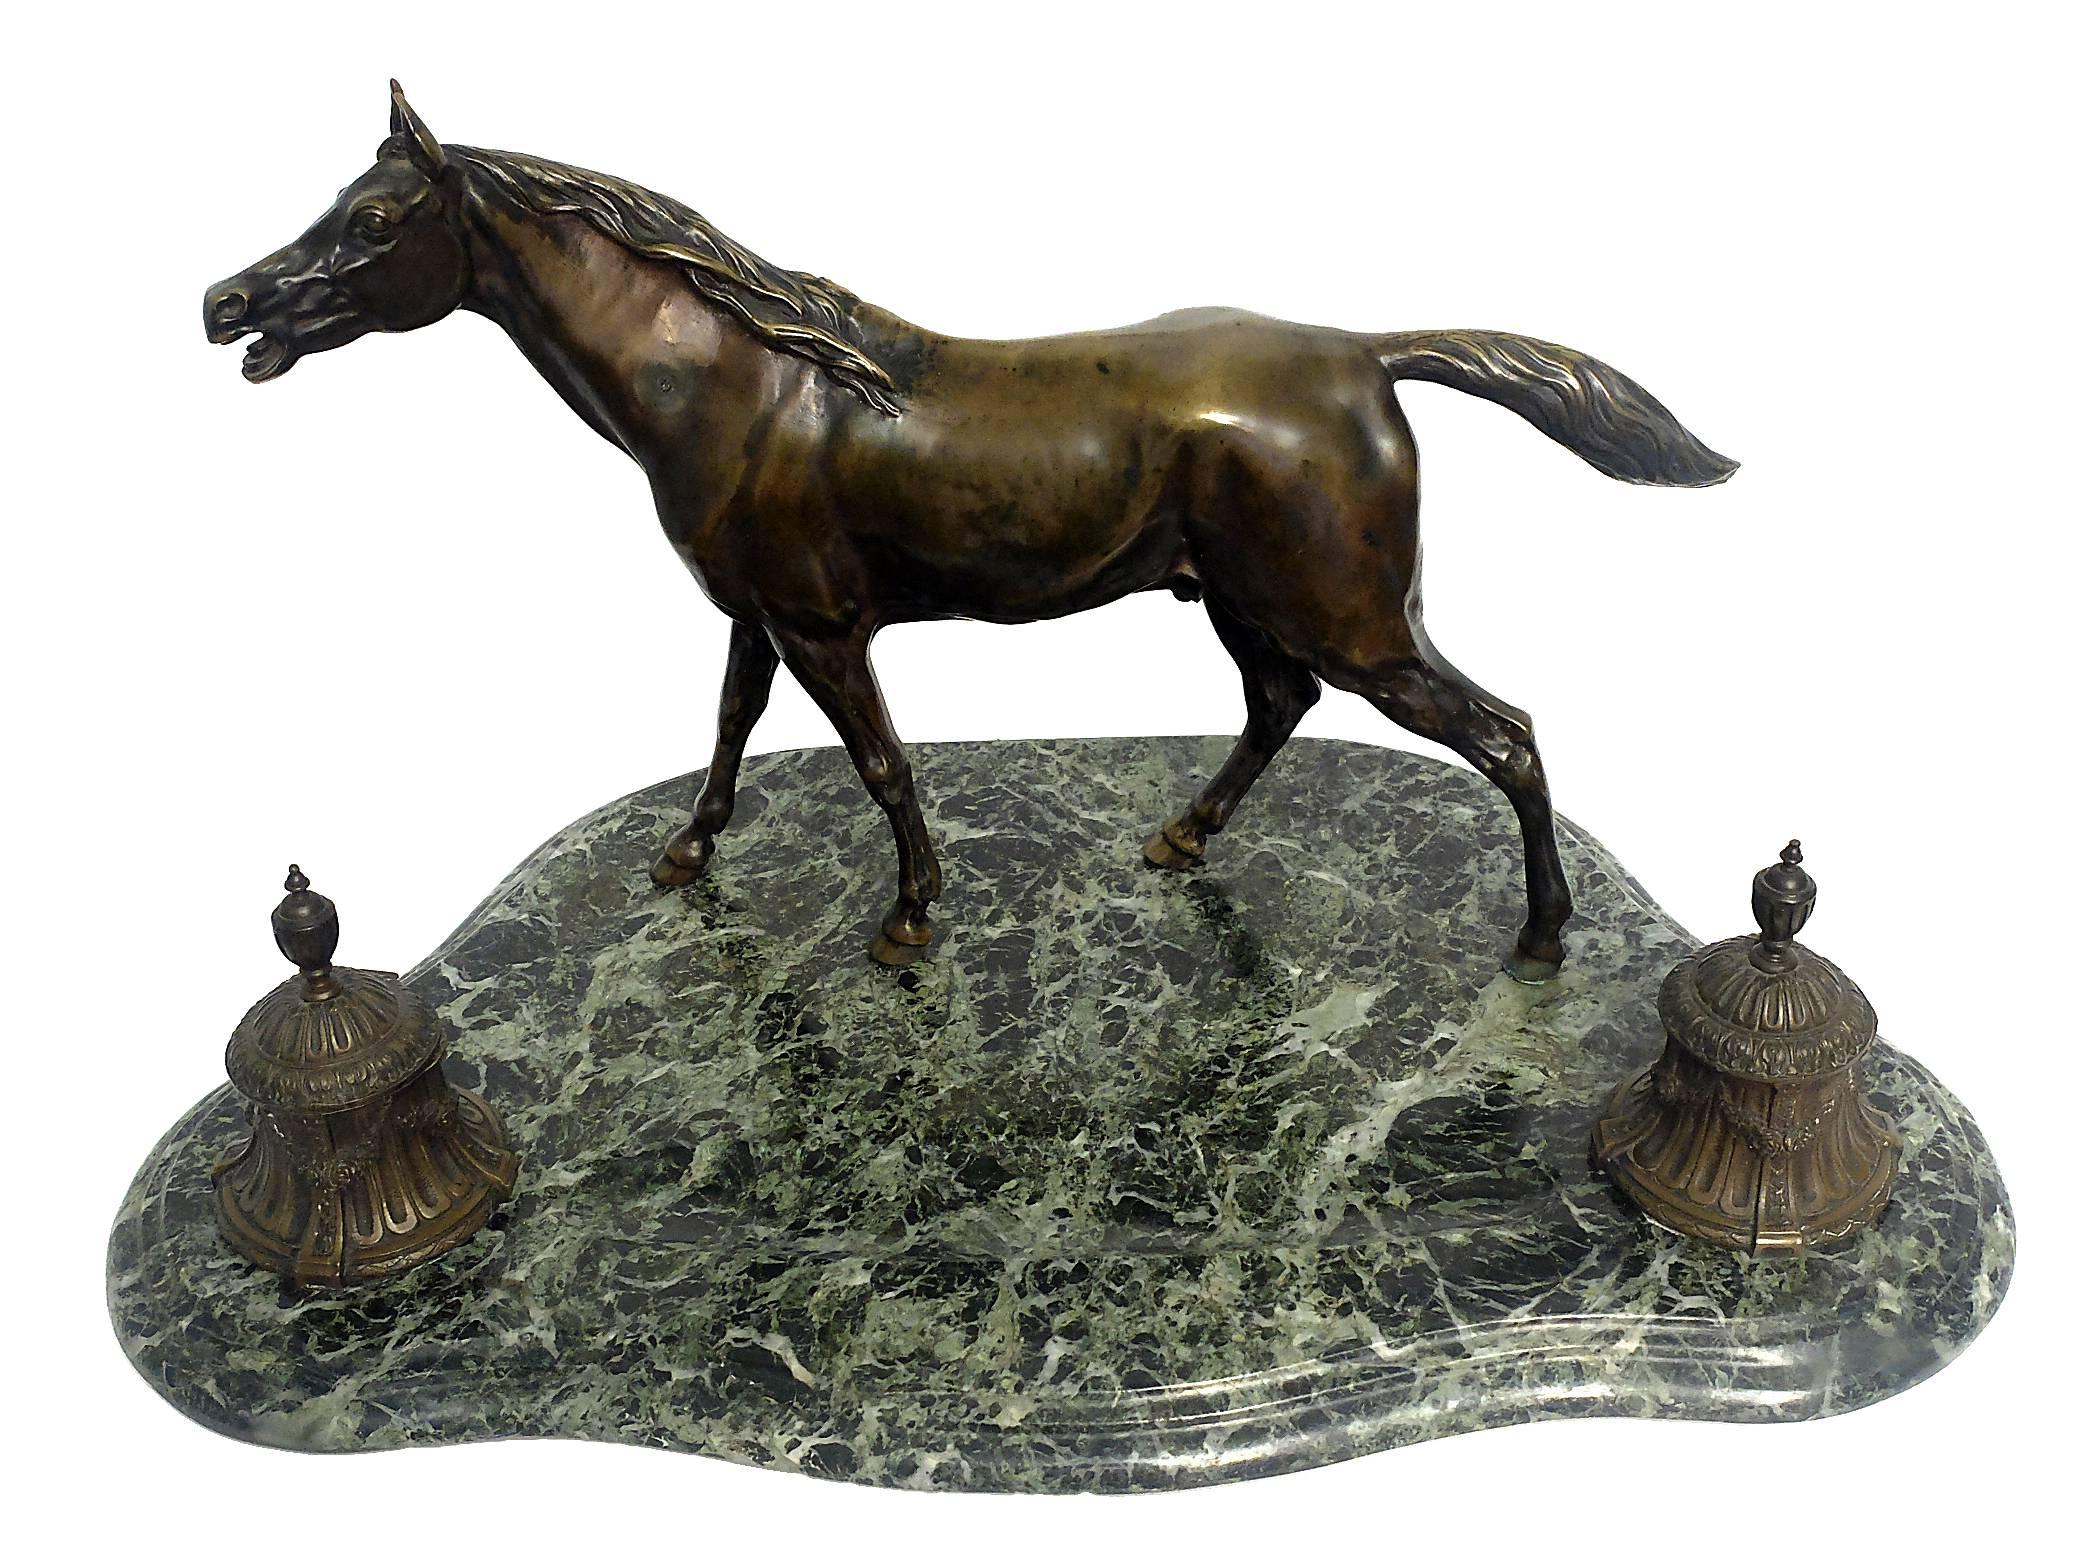 English bronze and marble inkwell, the base is made out of green veined marble, over which is a bronze of riding horse and two ink reservoir. Missing glasses, England, circa 1880.